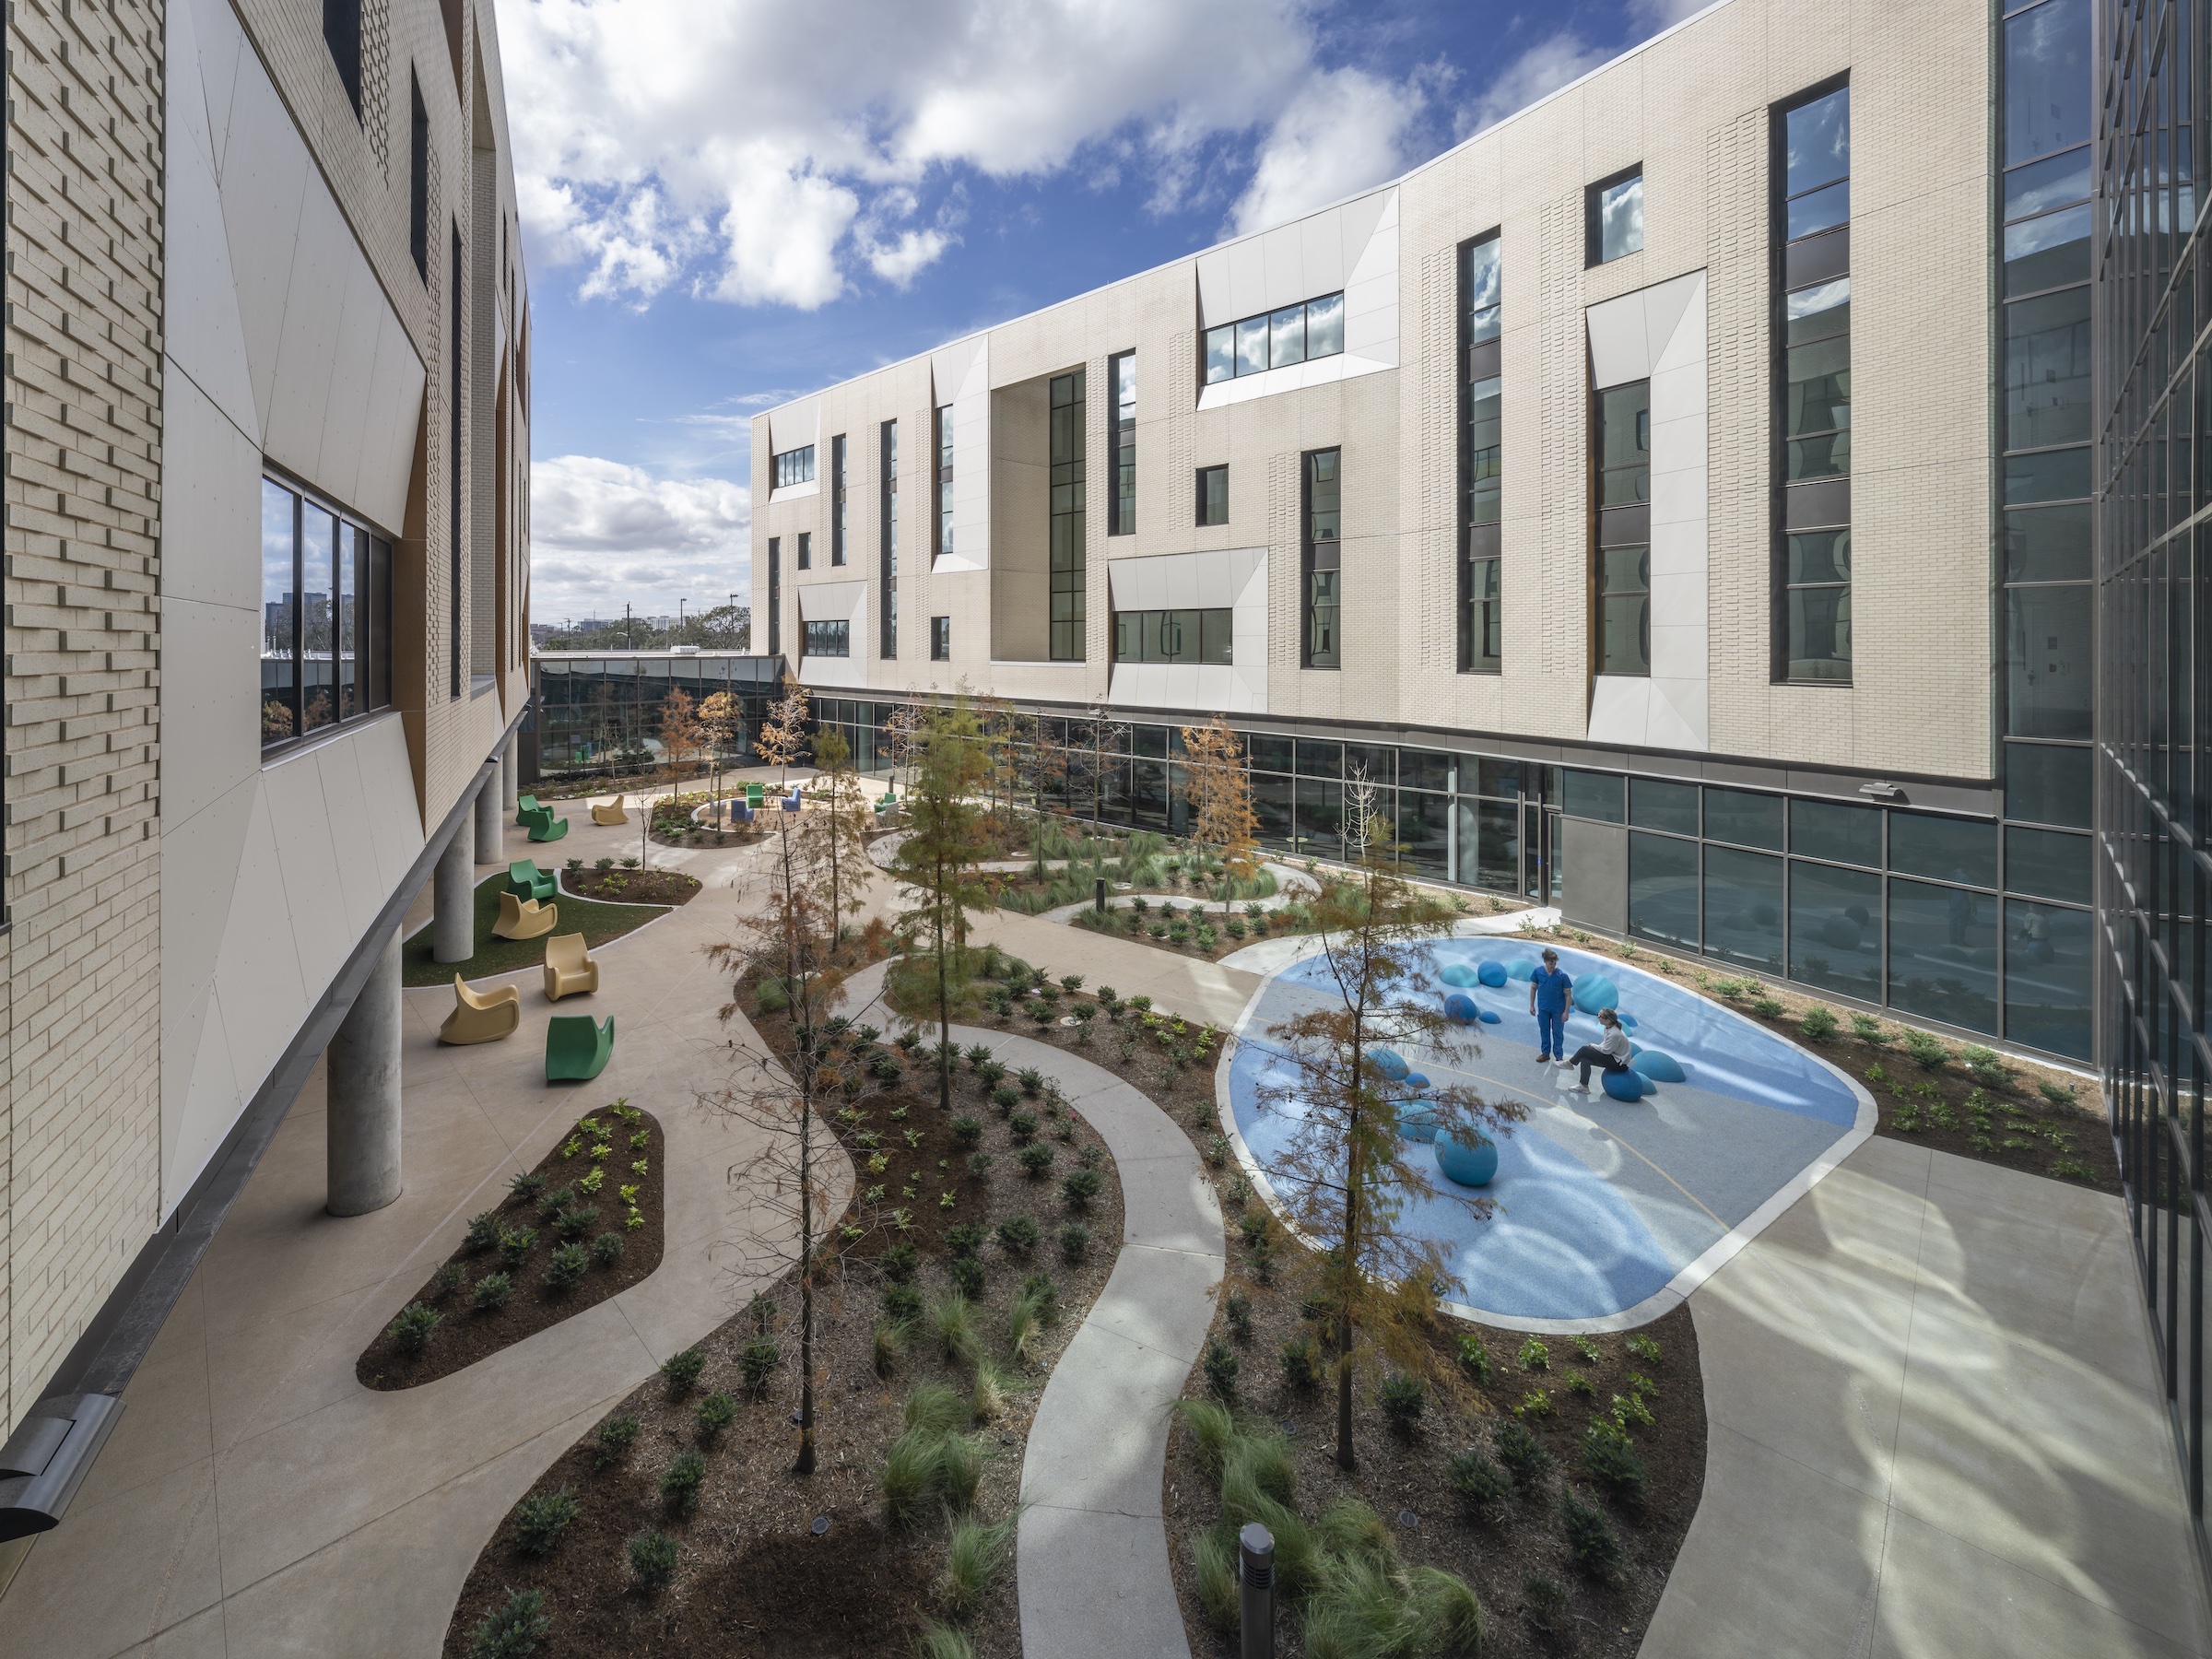 Next-gen behavioral health facilities use design innovation as part of the treatment